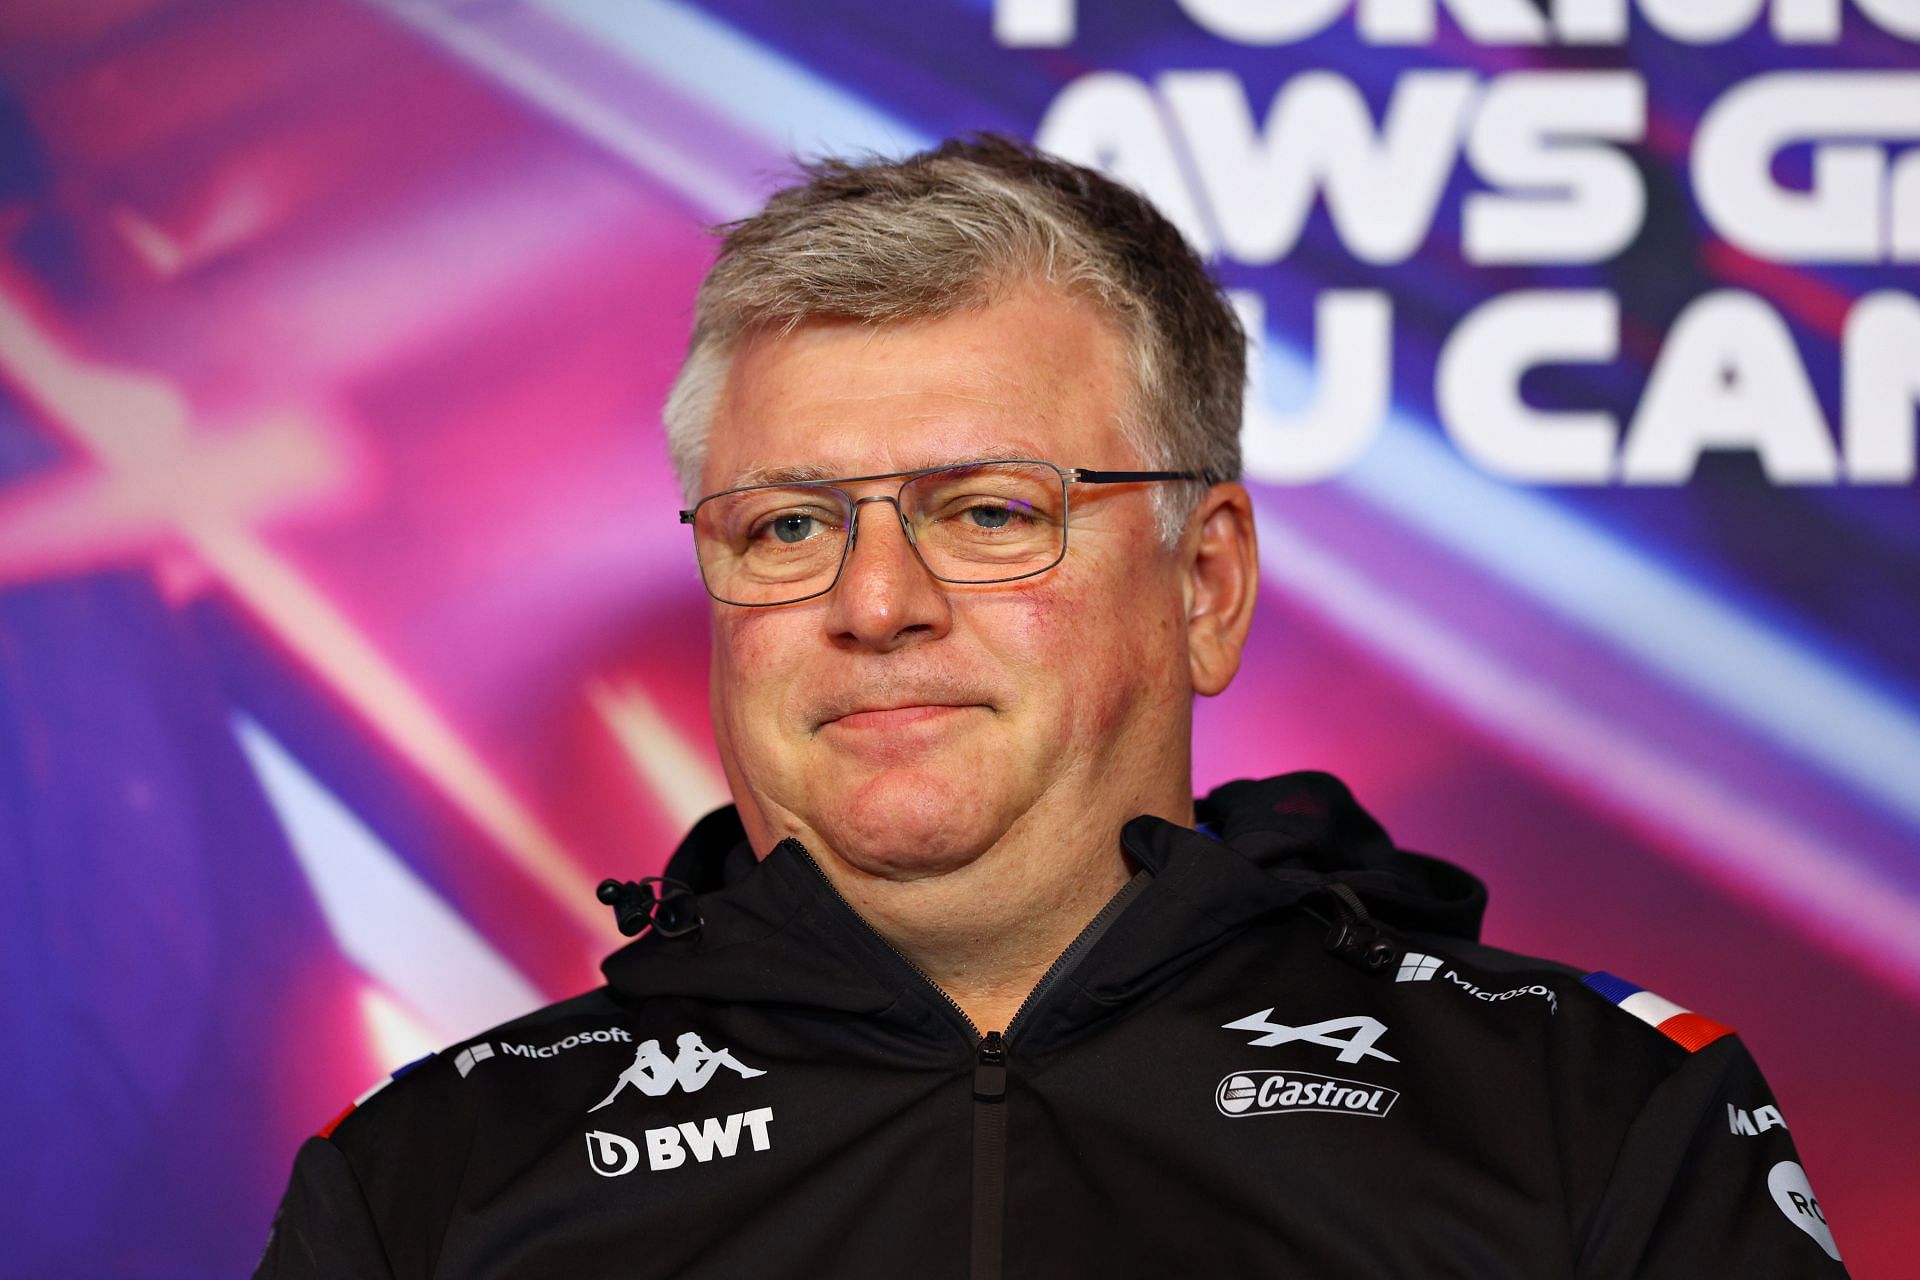 Alpine team principal Otmar Szafnauer speaks to the media ahead of the 2022 F1 Canadian GP (Photo by Clive Rose/Getty Images)